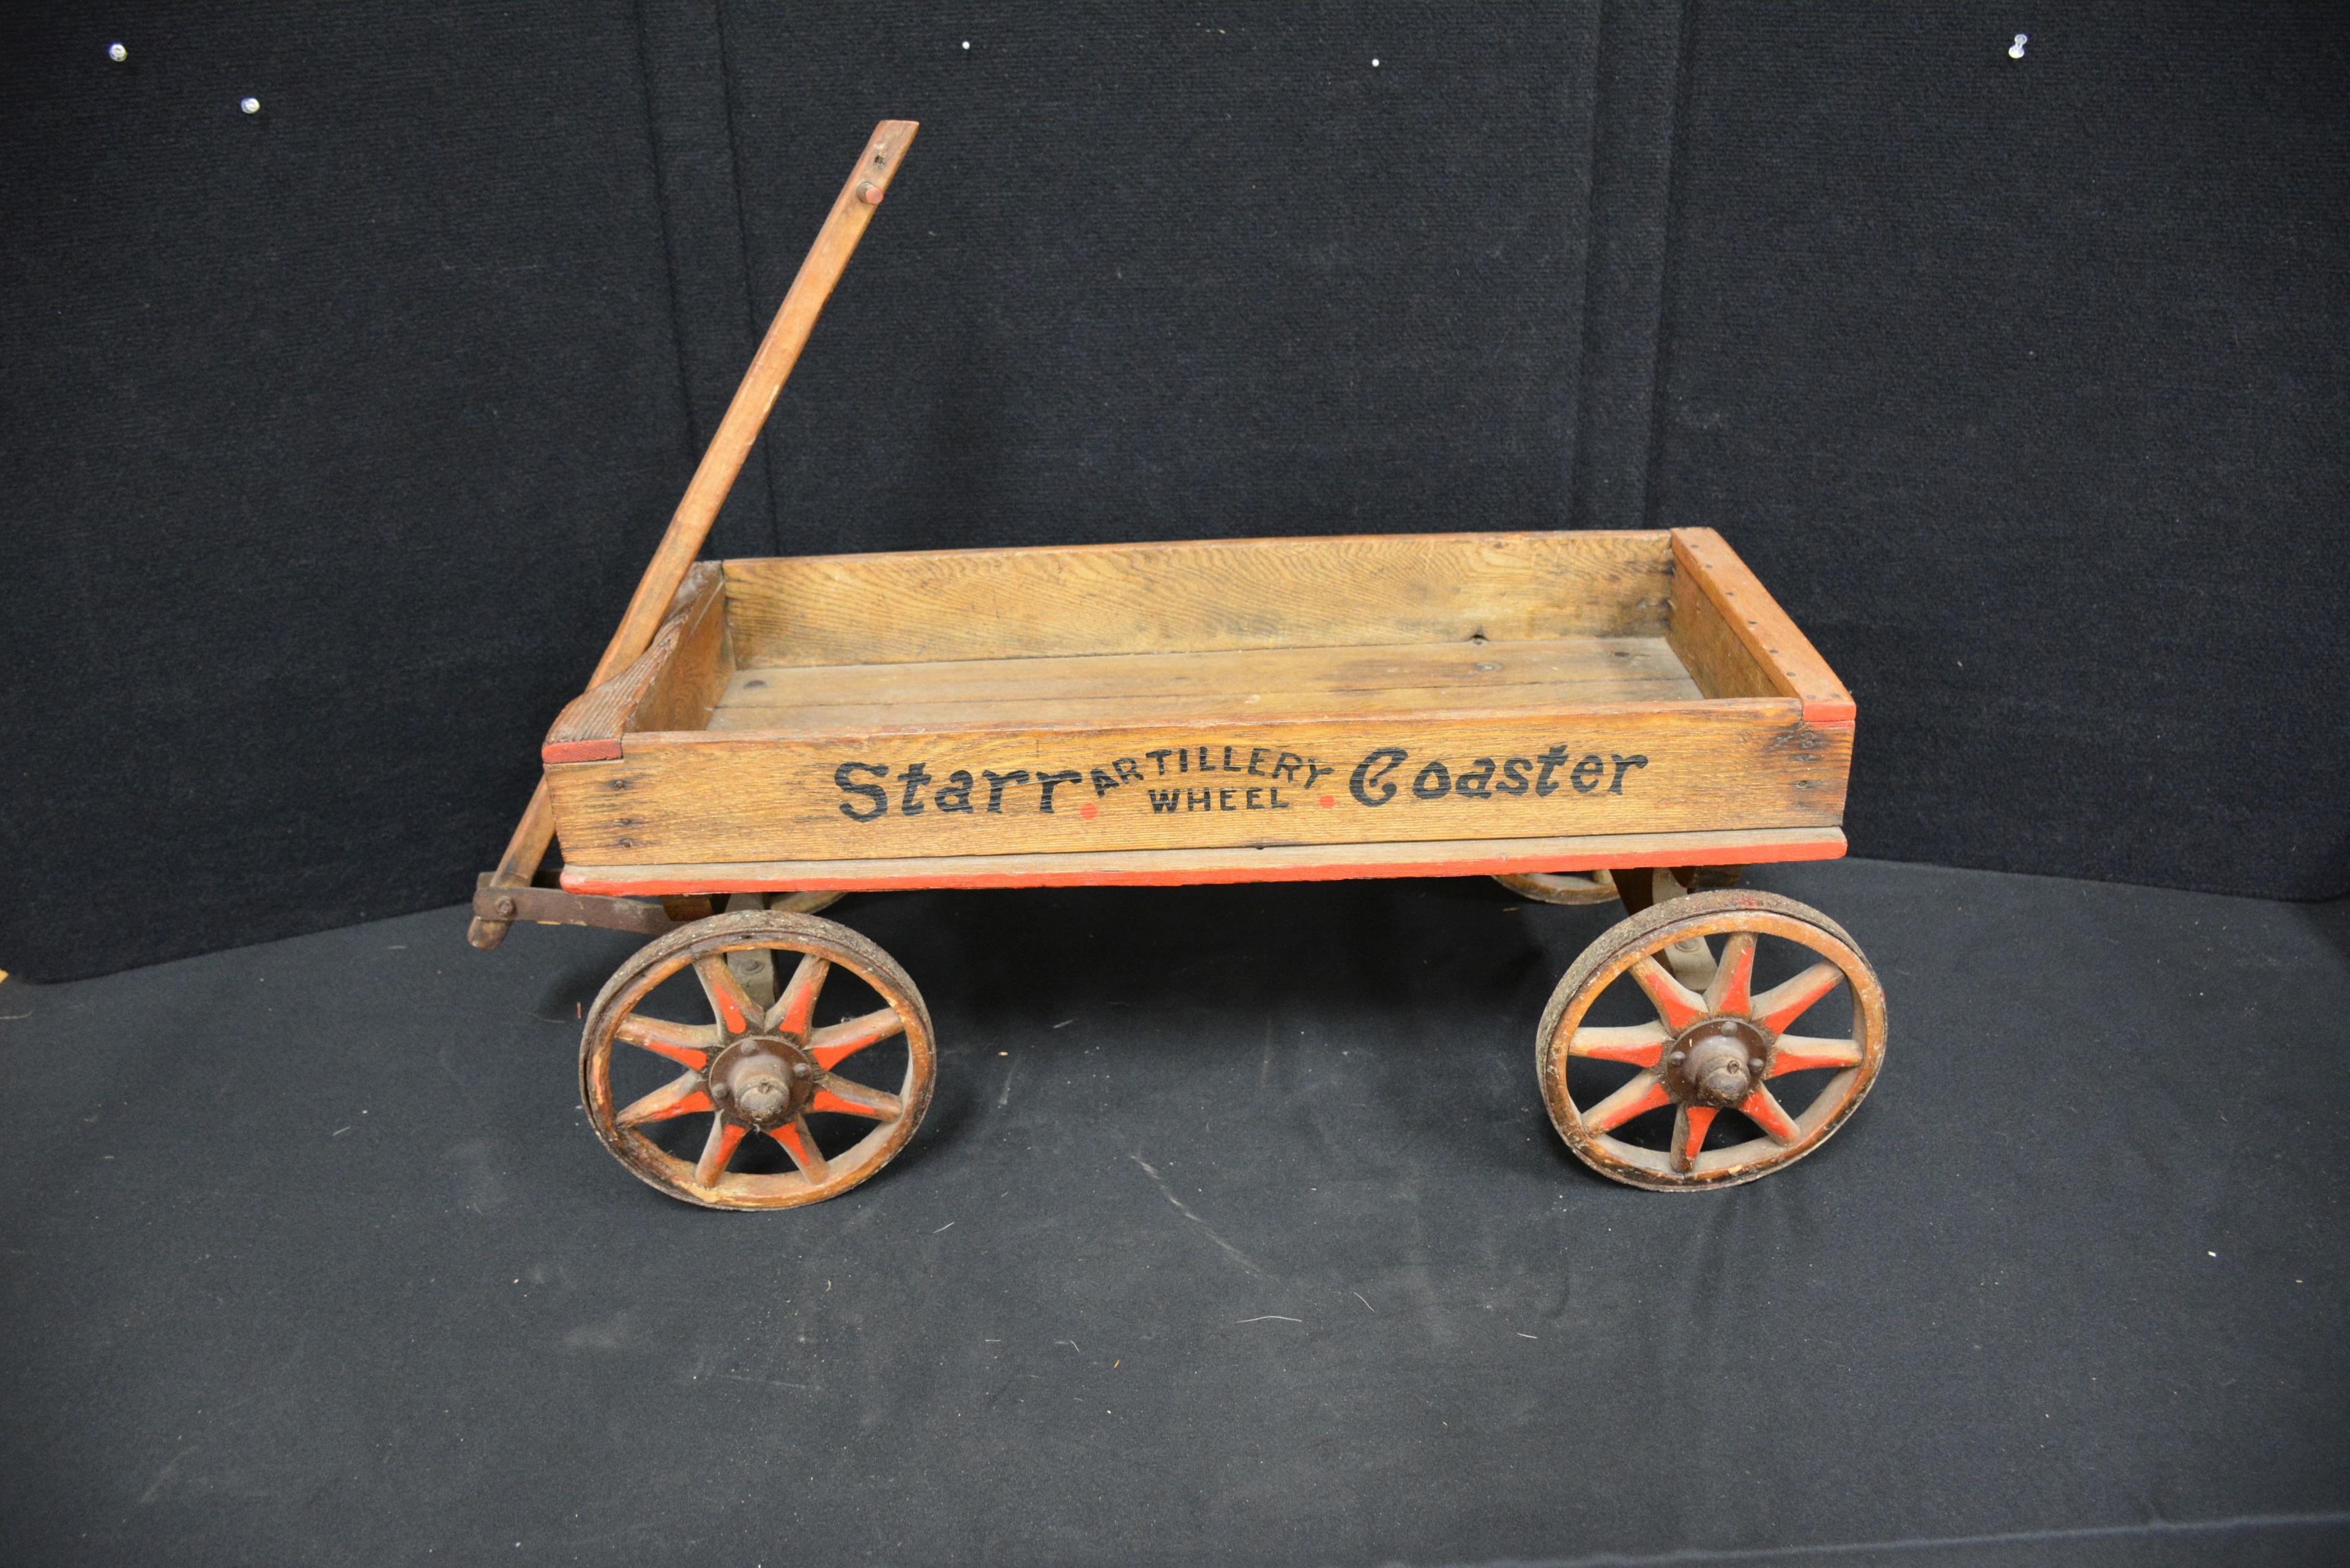 Starr Coaster Artillery Wheel Child's Wagon w/Wooden Spoked Wheels; Good Condition; Box is 28"x11".